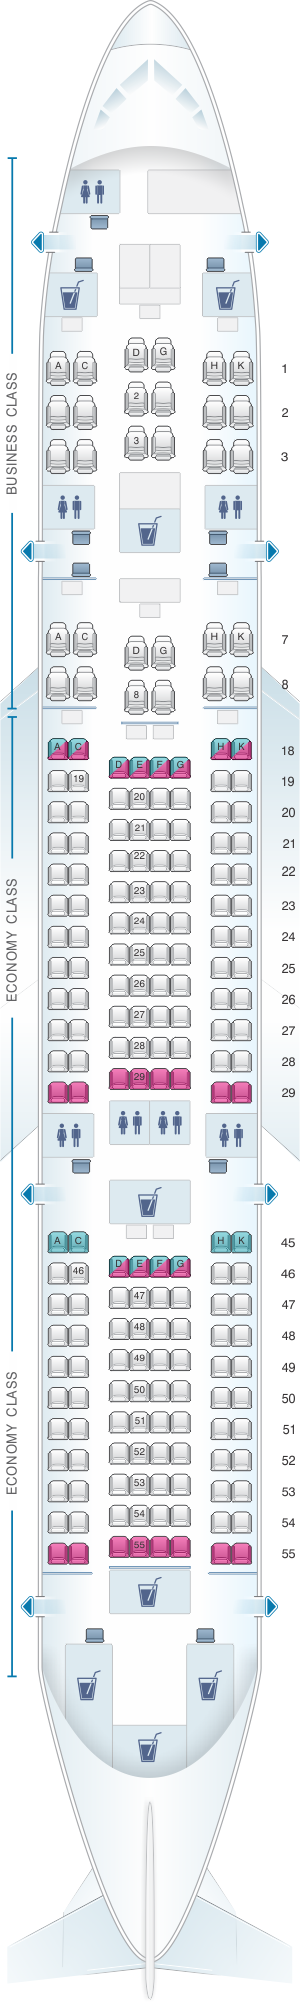 Seat map for Japan Airlines (JAL) Boeing B787-8 E03